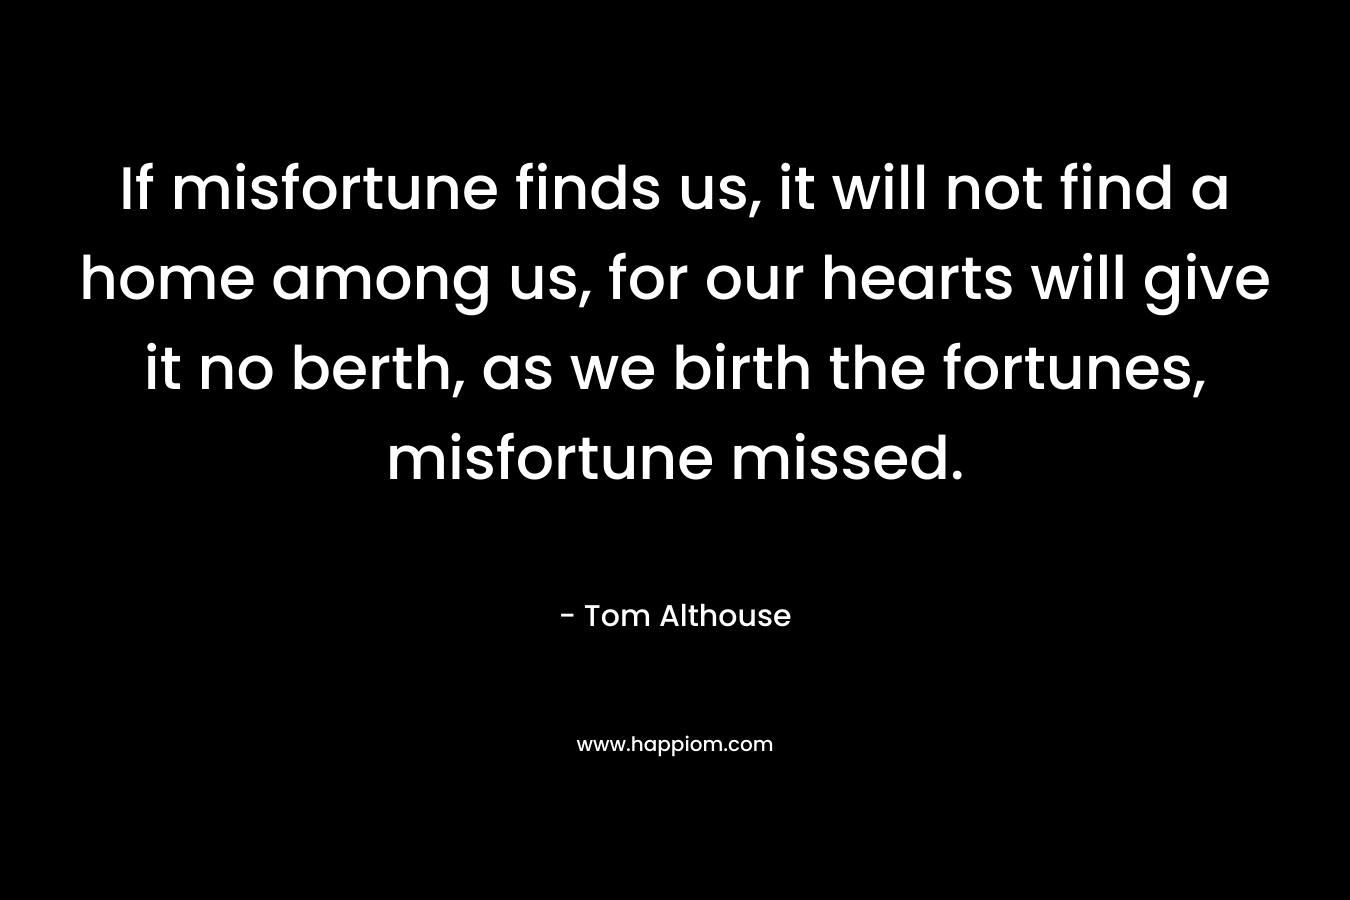 If misfortune finds us, it will not find a home among us, for our hearts will give it no berth, as we birth the fortunes, misfortune missed. – Tom Althouse